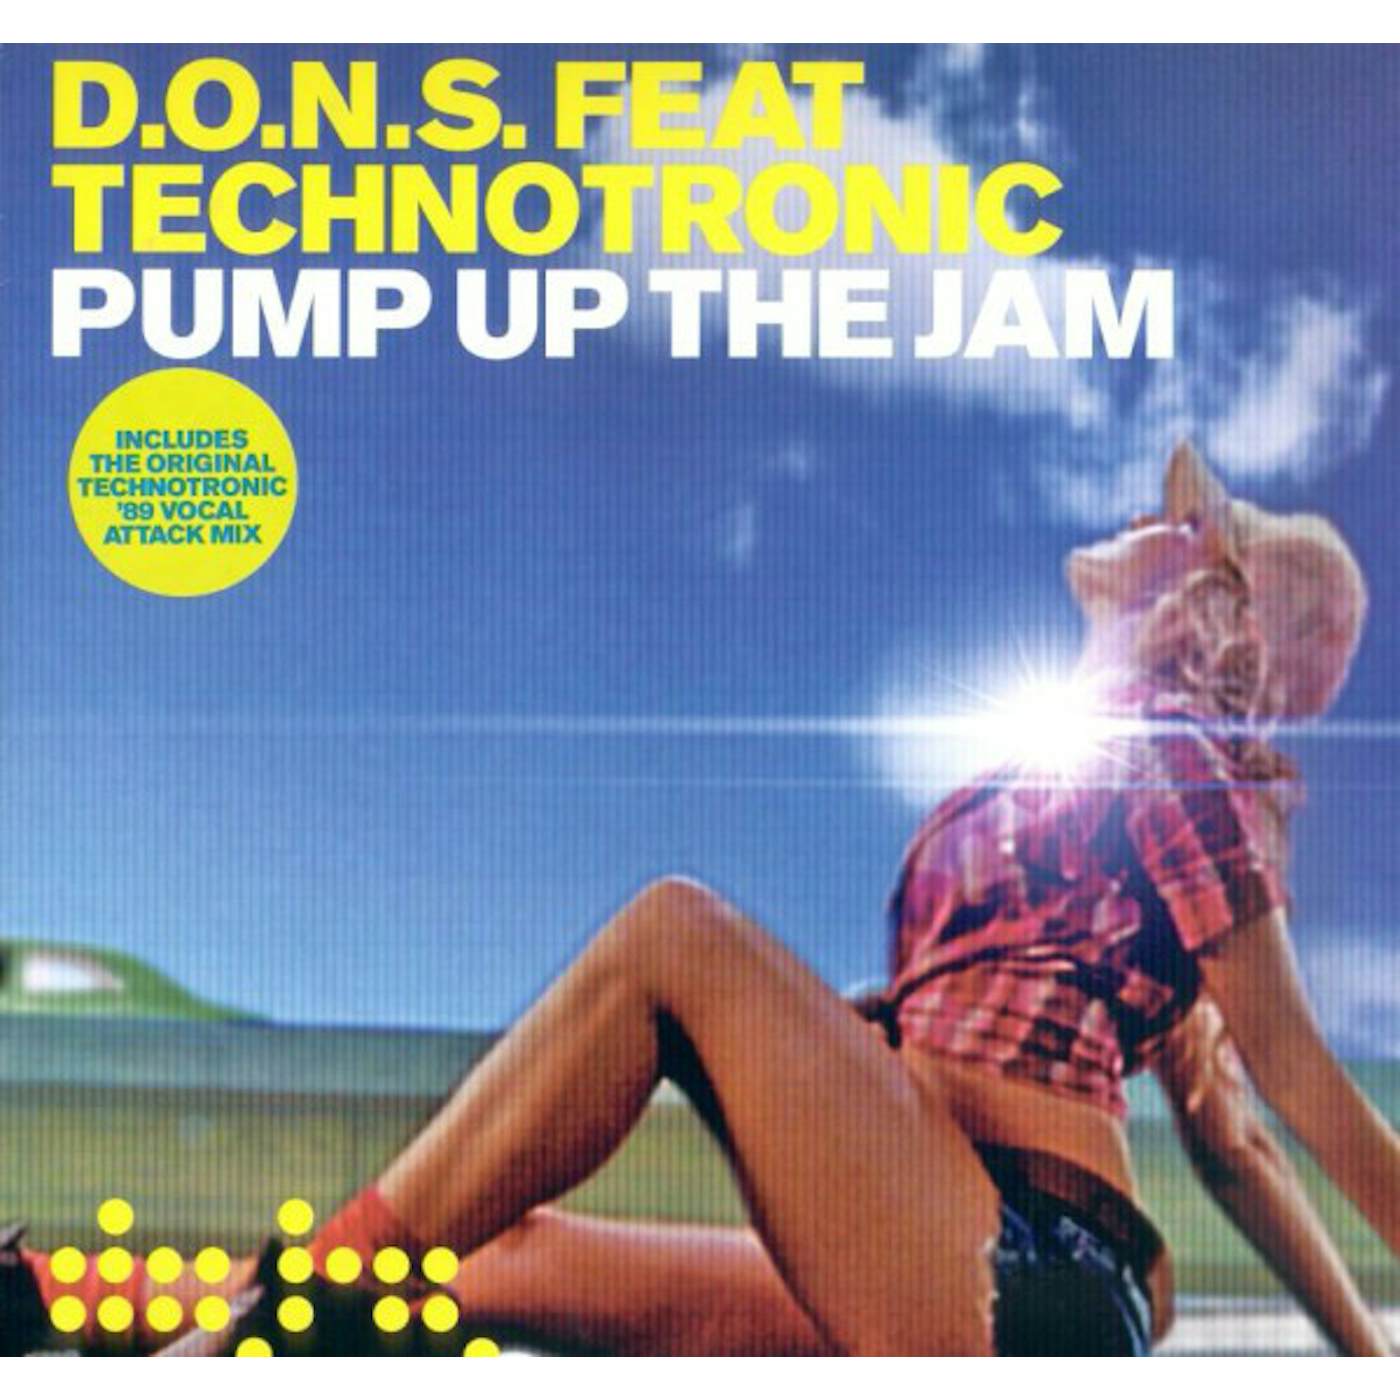 D.O.N.S. feat. Technotronic PUMP UP THE JAM Vinyl Record - UK Release